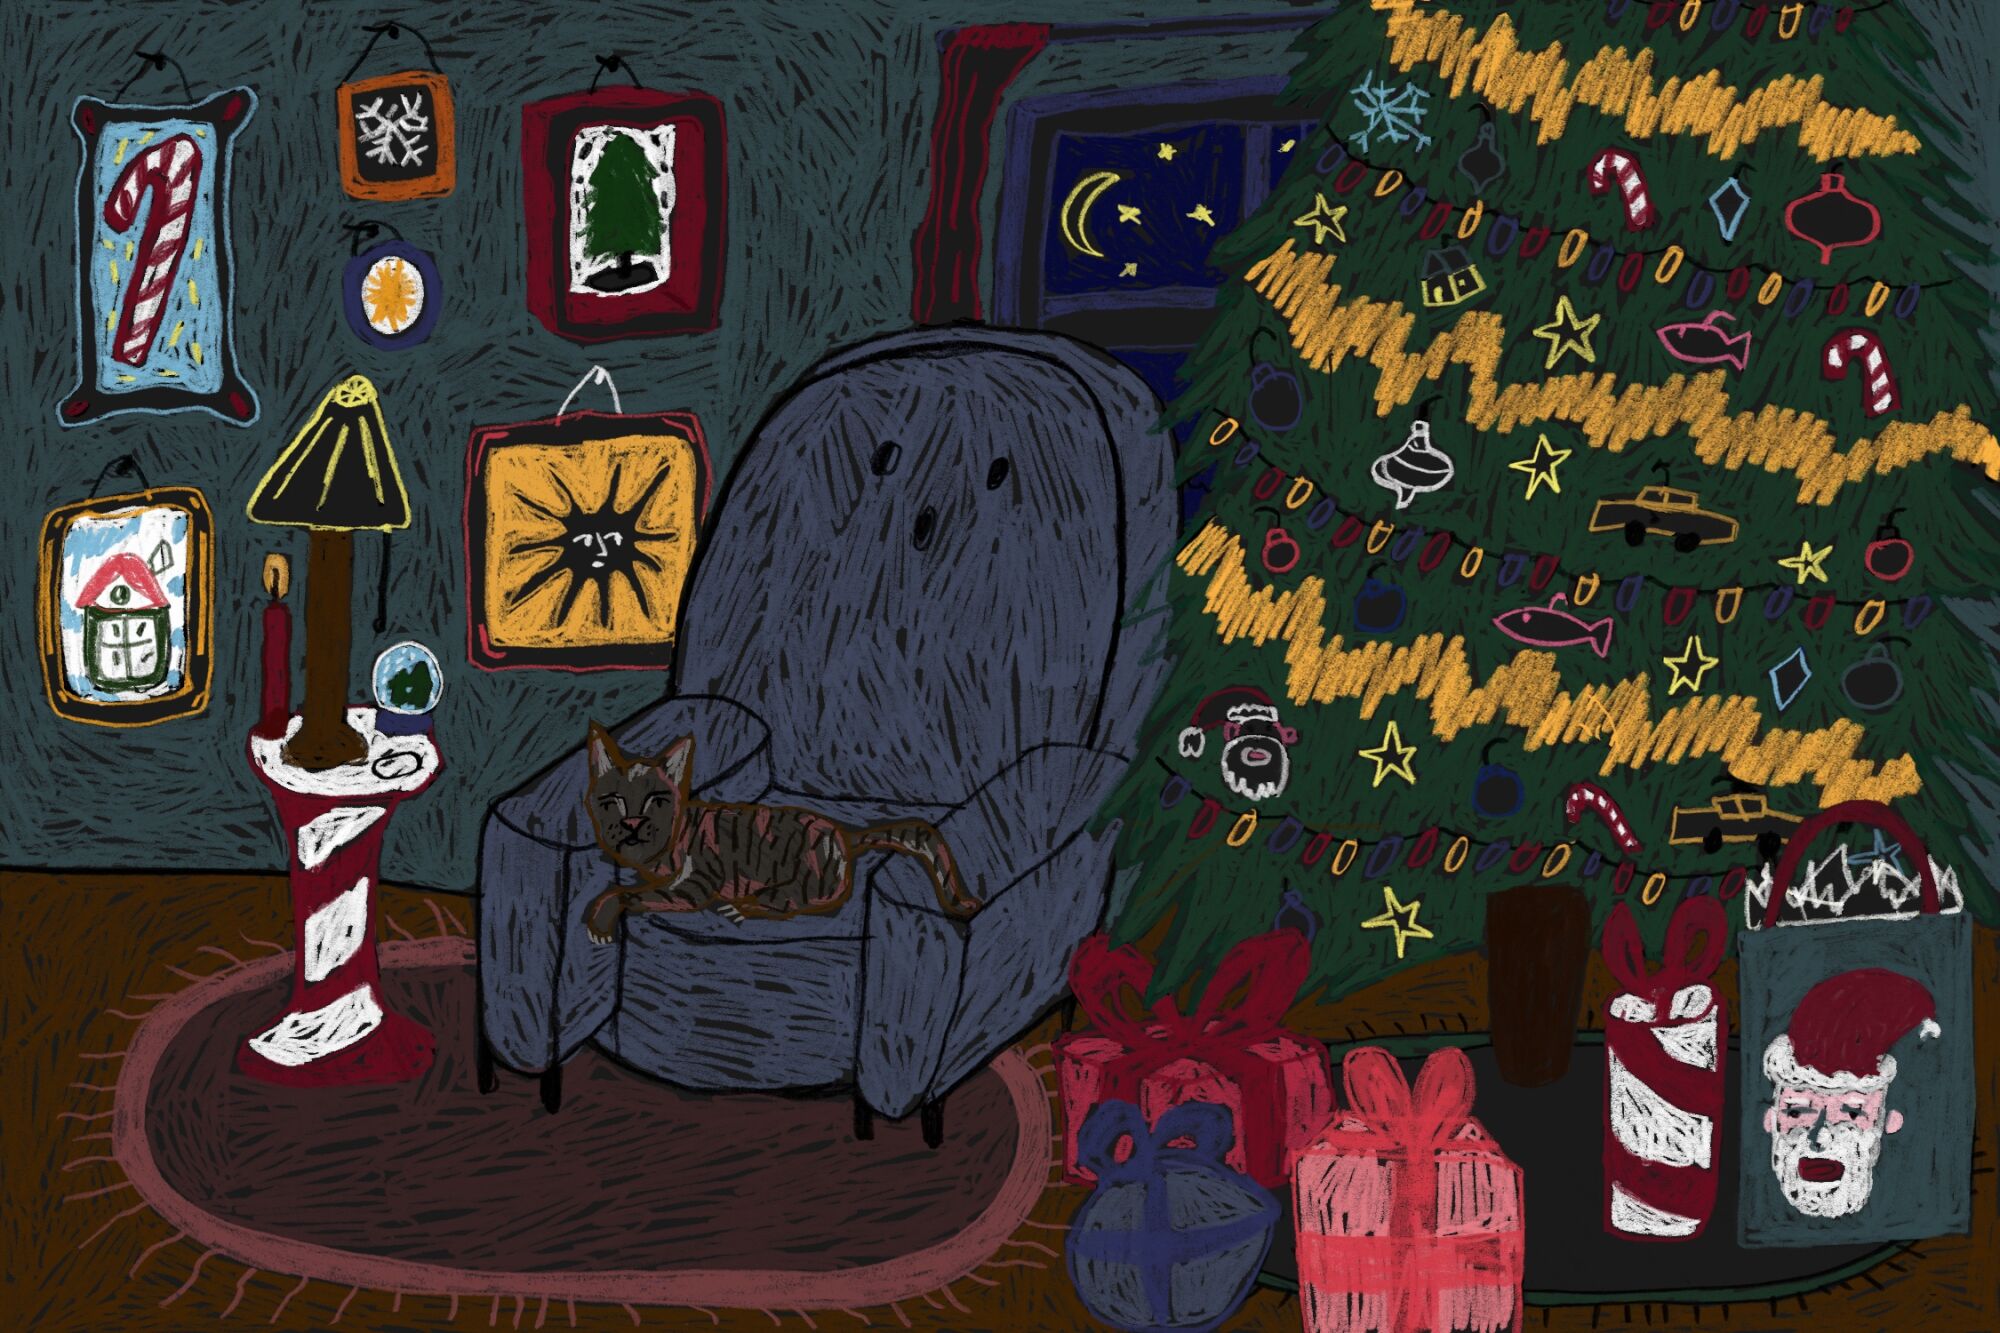 An interior scene of a home decorated for Christmas with lights, a tree, presents, music, and a cat asleep in a chair.